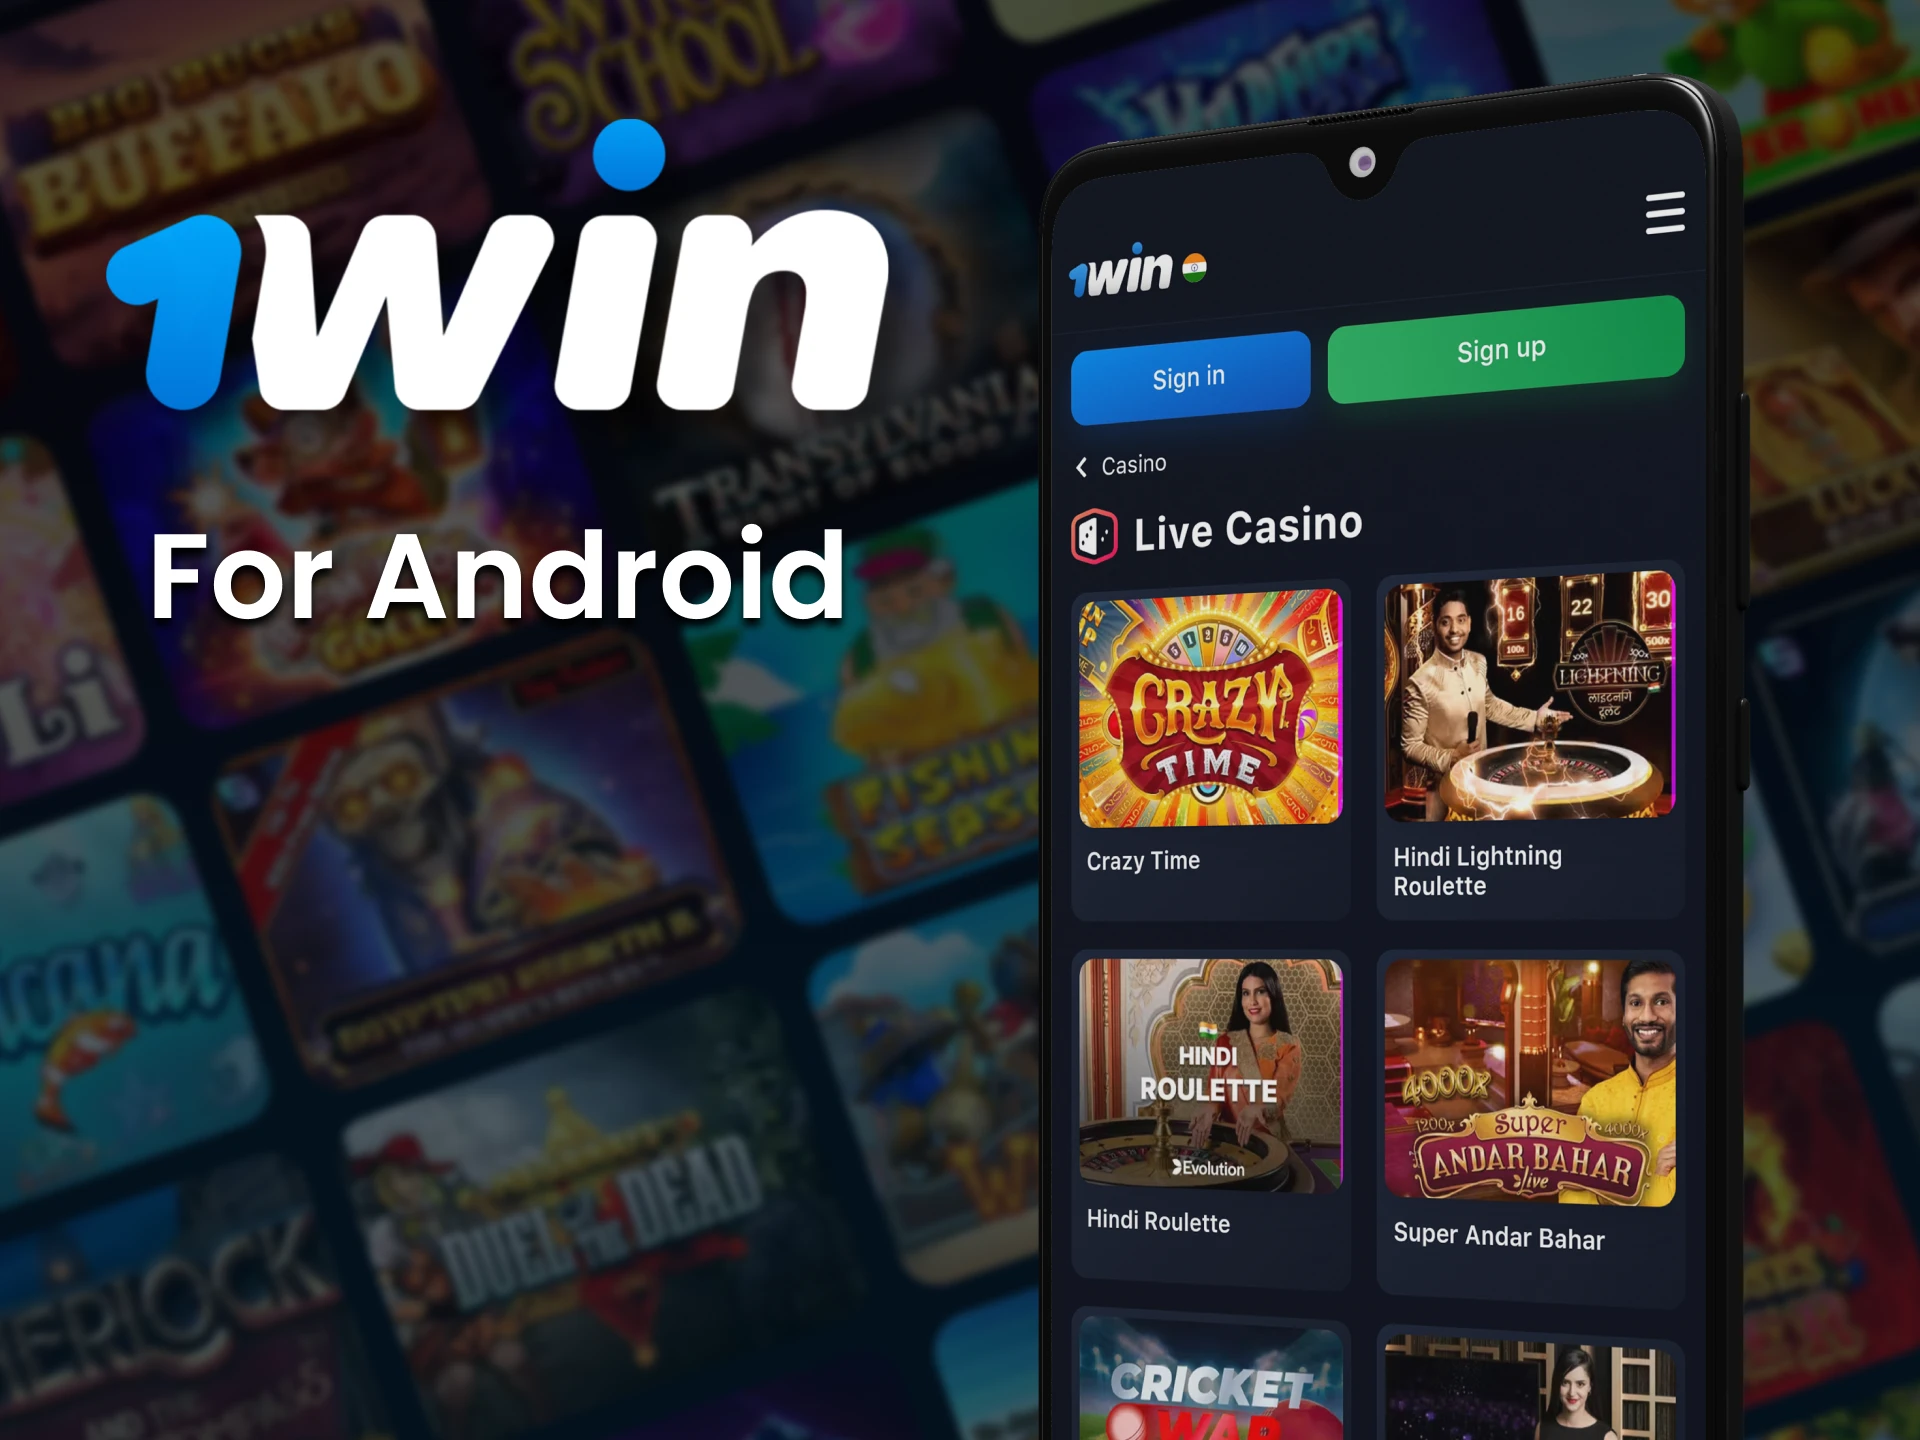 You can play at 1win casino through the Android app.